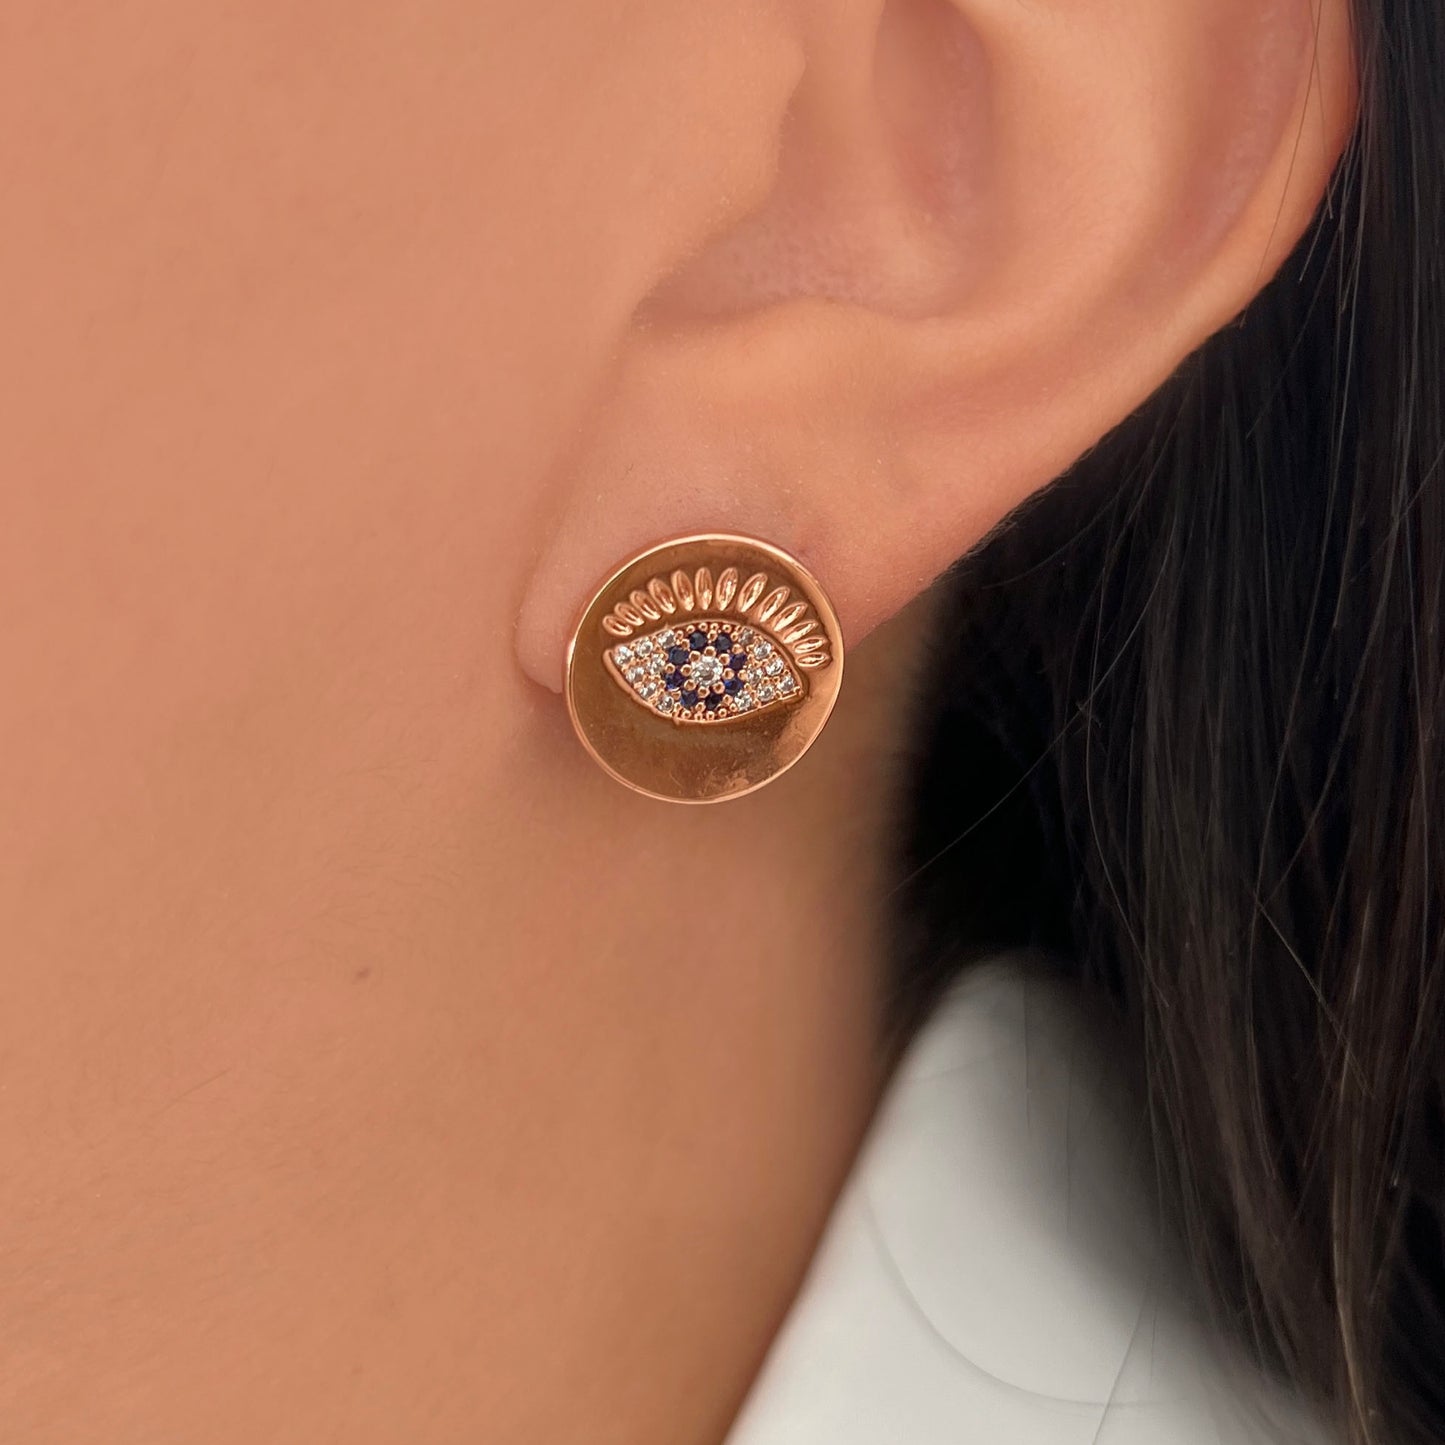 Coin earring with eye (888)